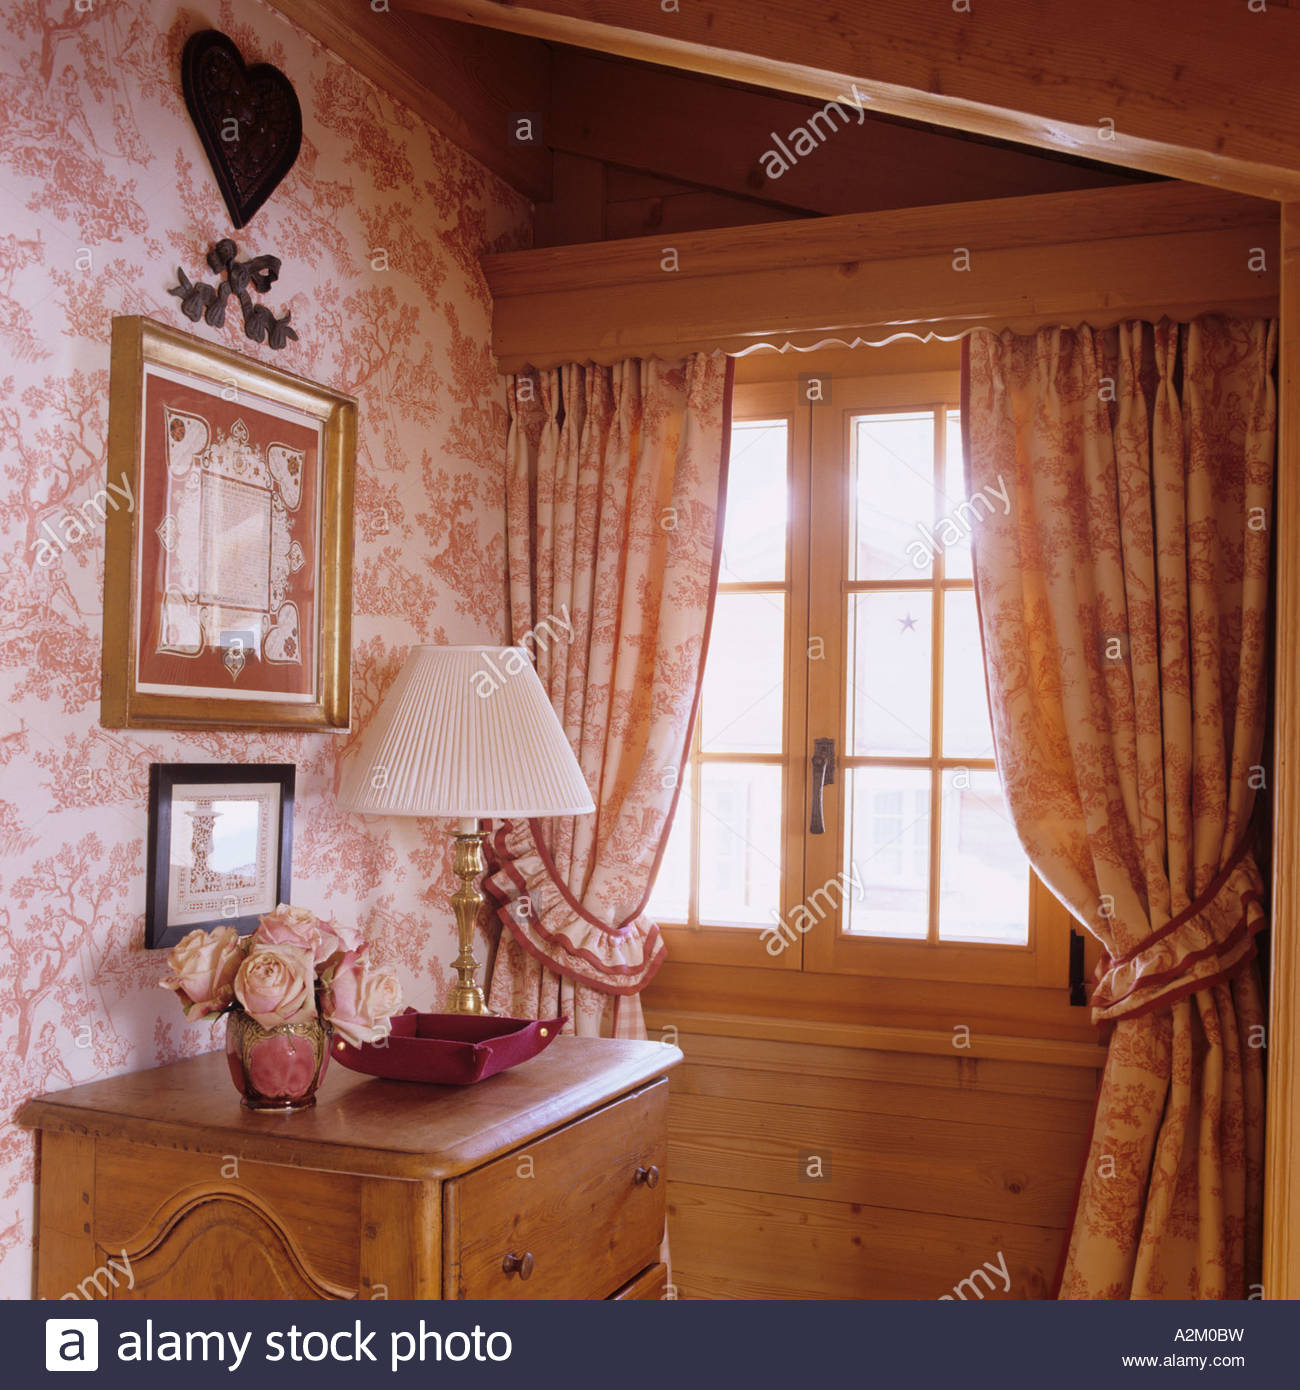 Stock Photo Window In Room With Matching Curtains And Wallpaper A